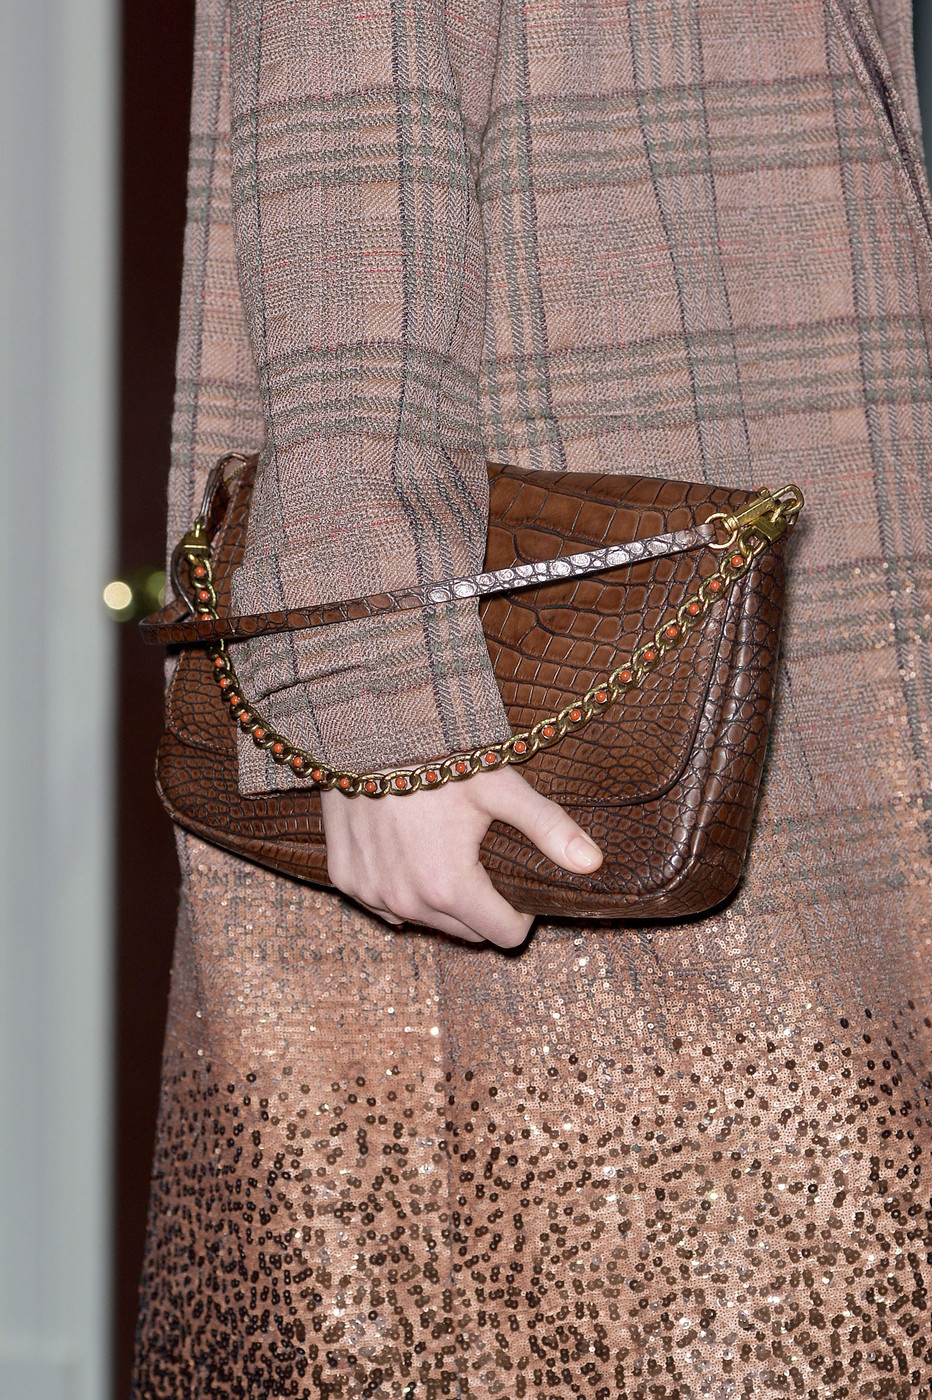 Louis Vuitton Fall Winter 2013 2014: The BAGS |In LVoe ...